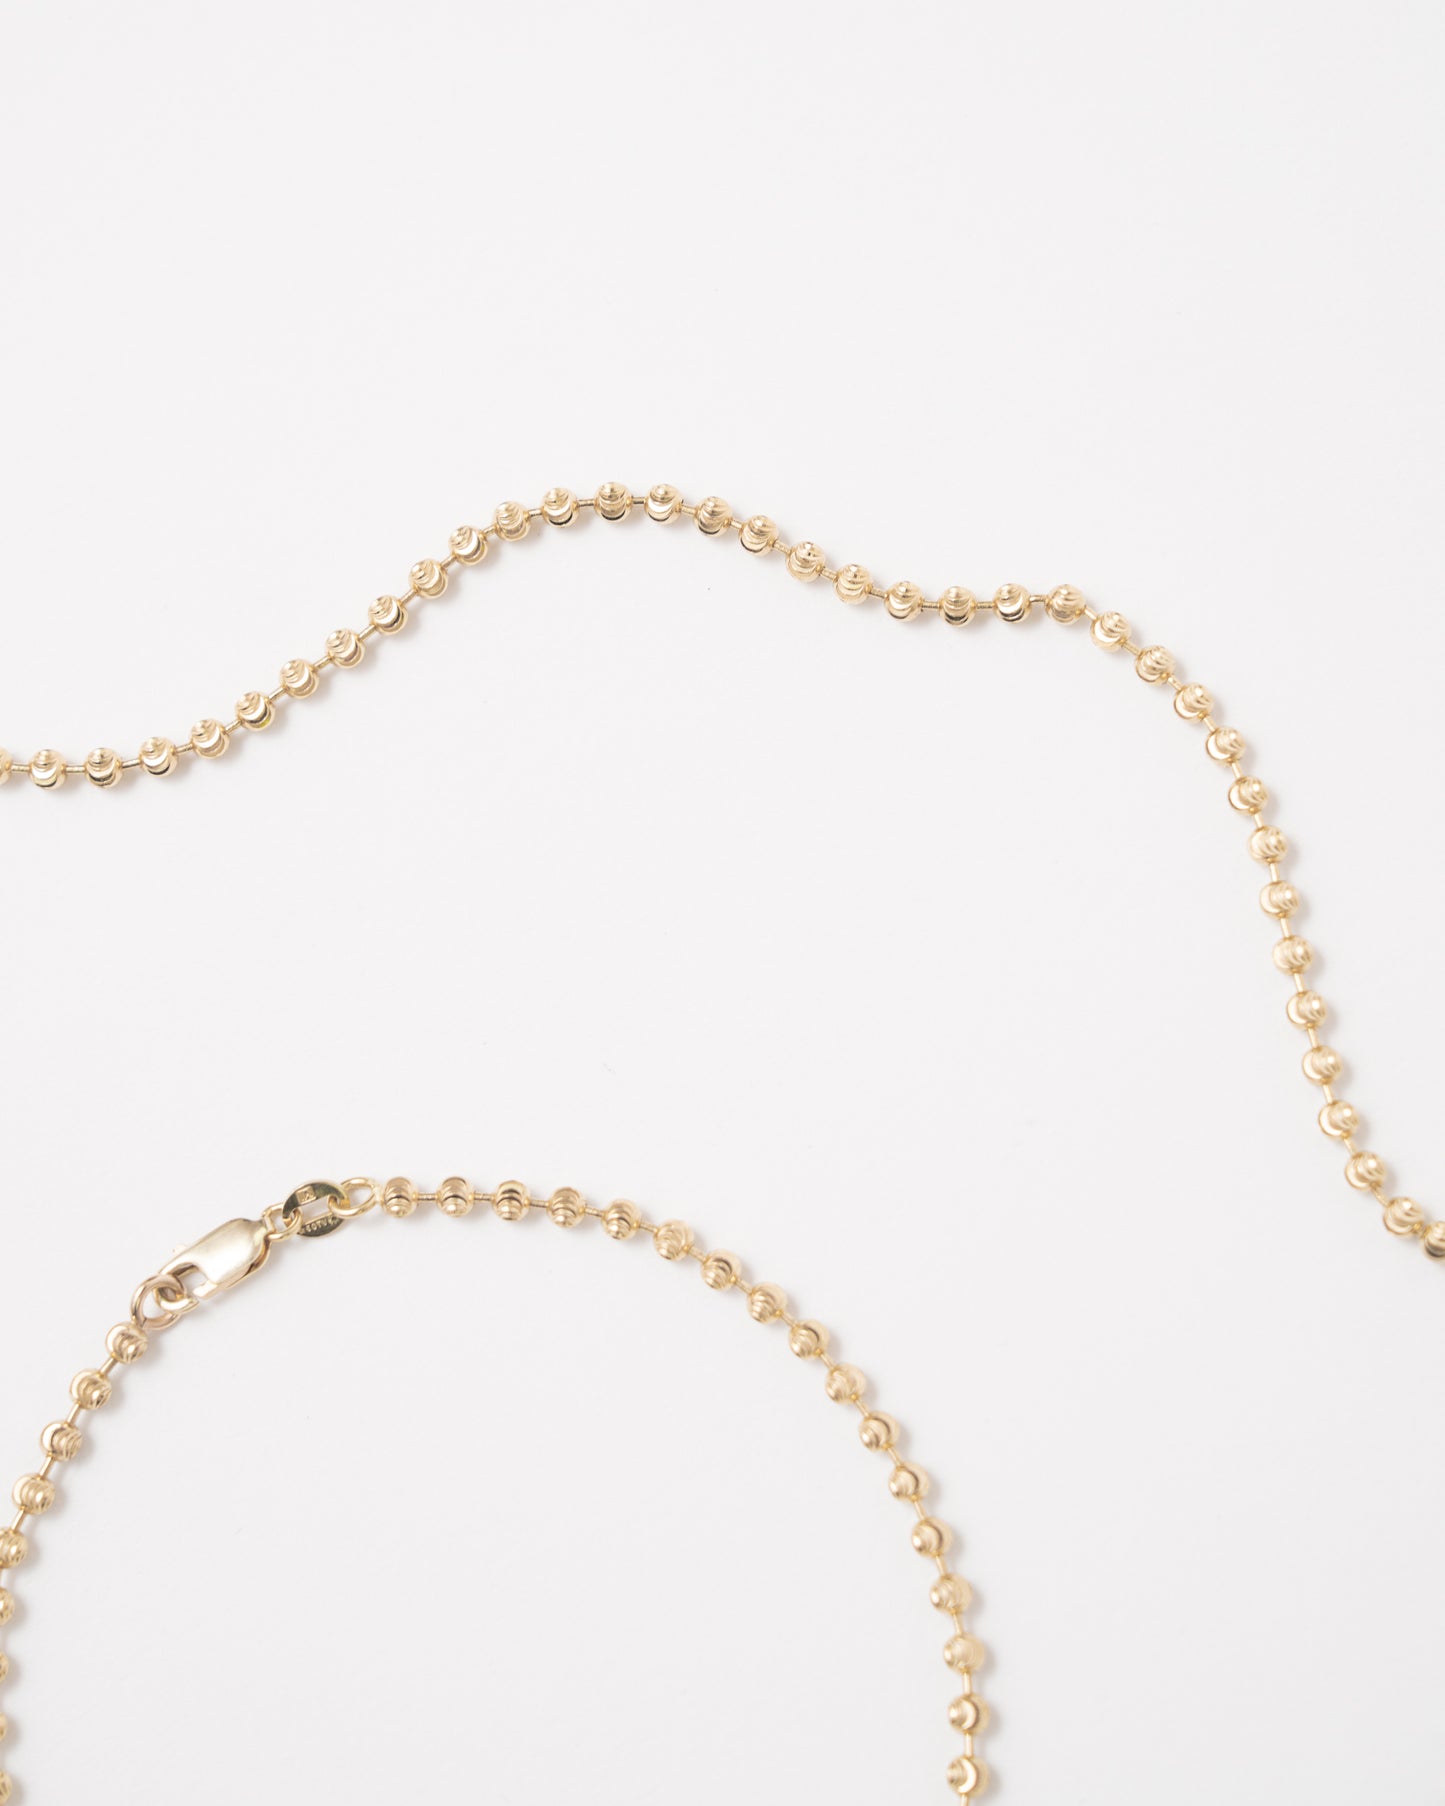 Toilet Chain Necklace - 14k Gold